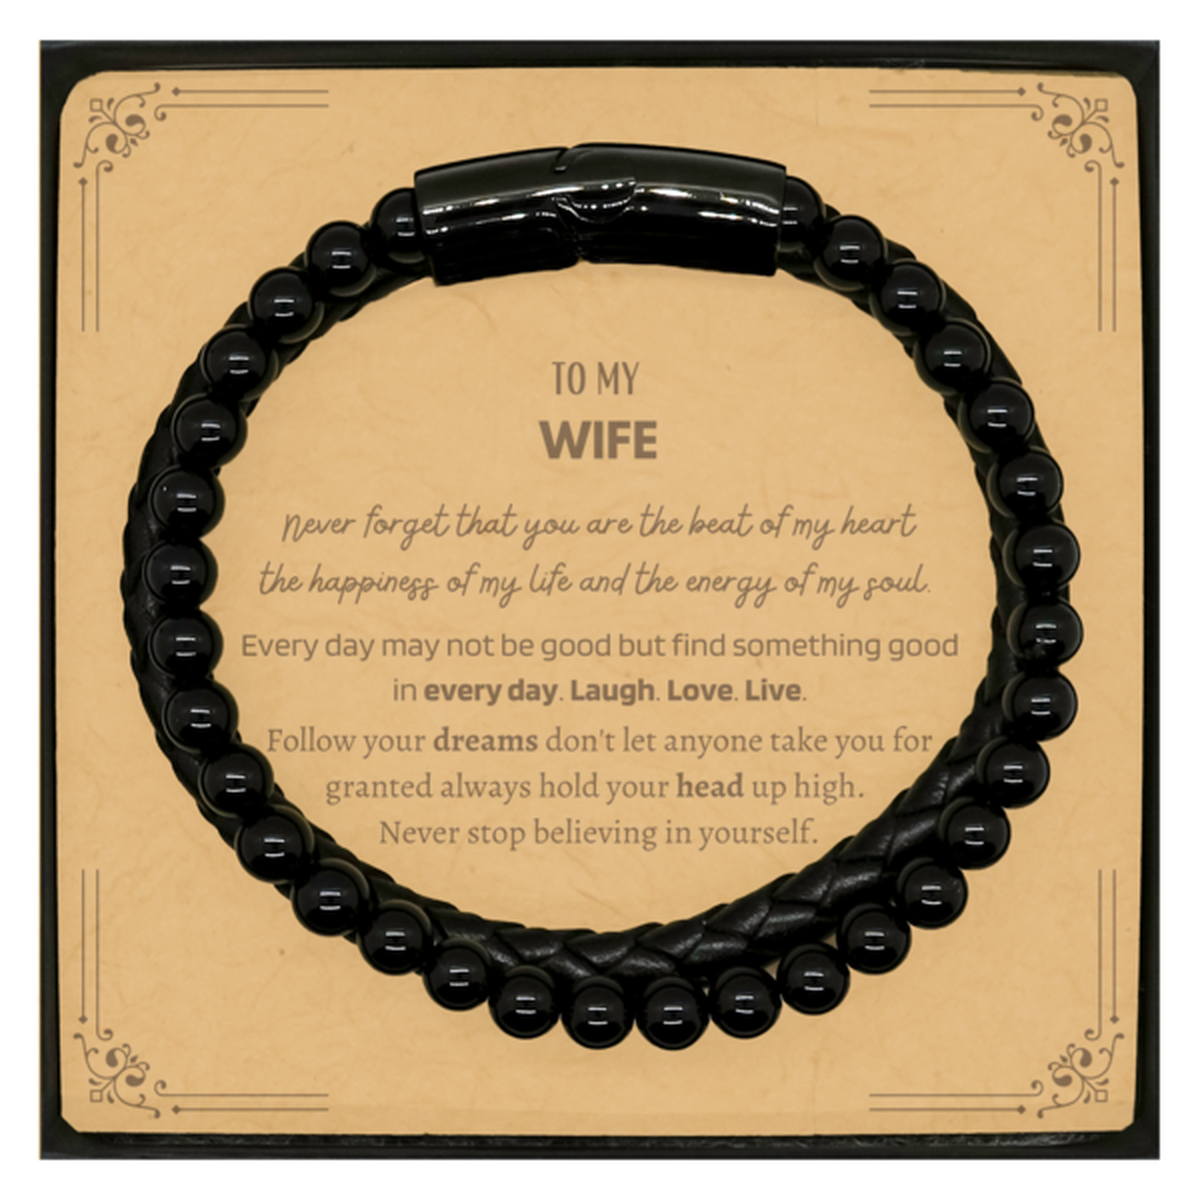 To My Wife Message Card Gifts, Christmas Wife Stone Leather Bracelets Present, Birthday Unique Motivational For Wife, To My Wife Never forget that you are the beat of my heart the happiness of my life and the energy of my soul